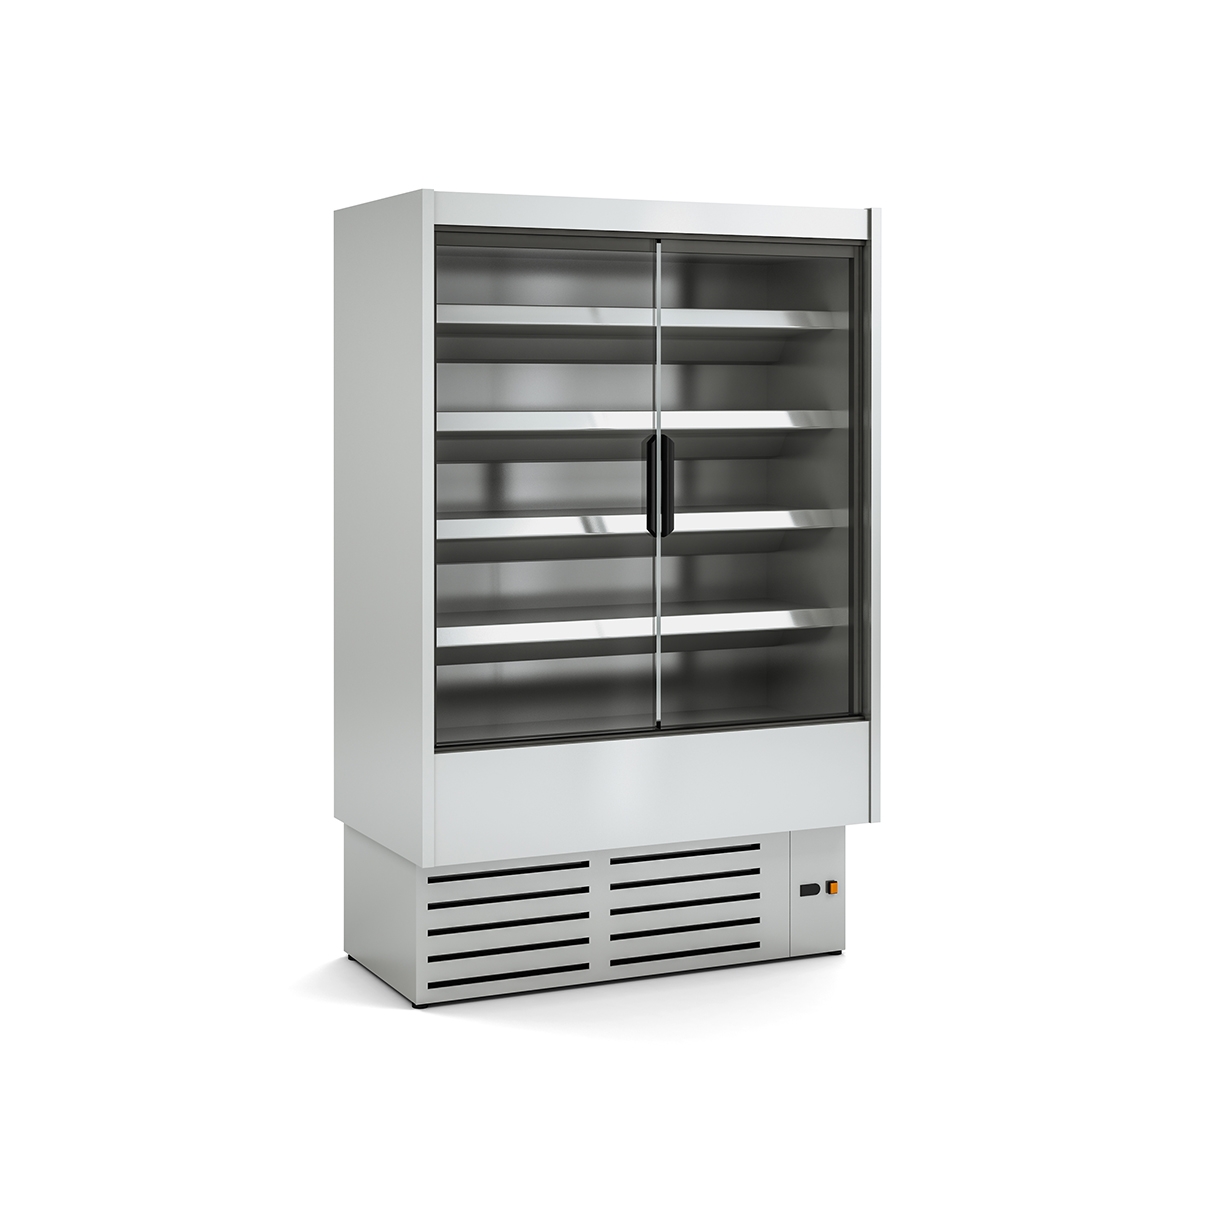 REFRIGERATED WALL-MOUNTED DISPLAY CABINET DG0 I M1-M2